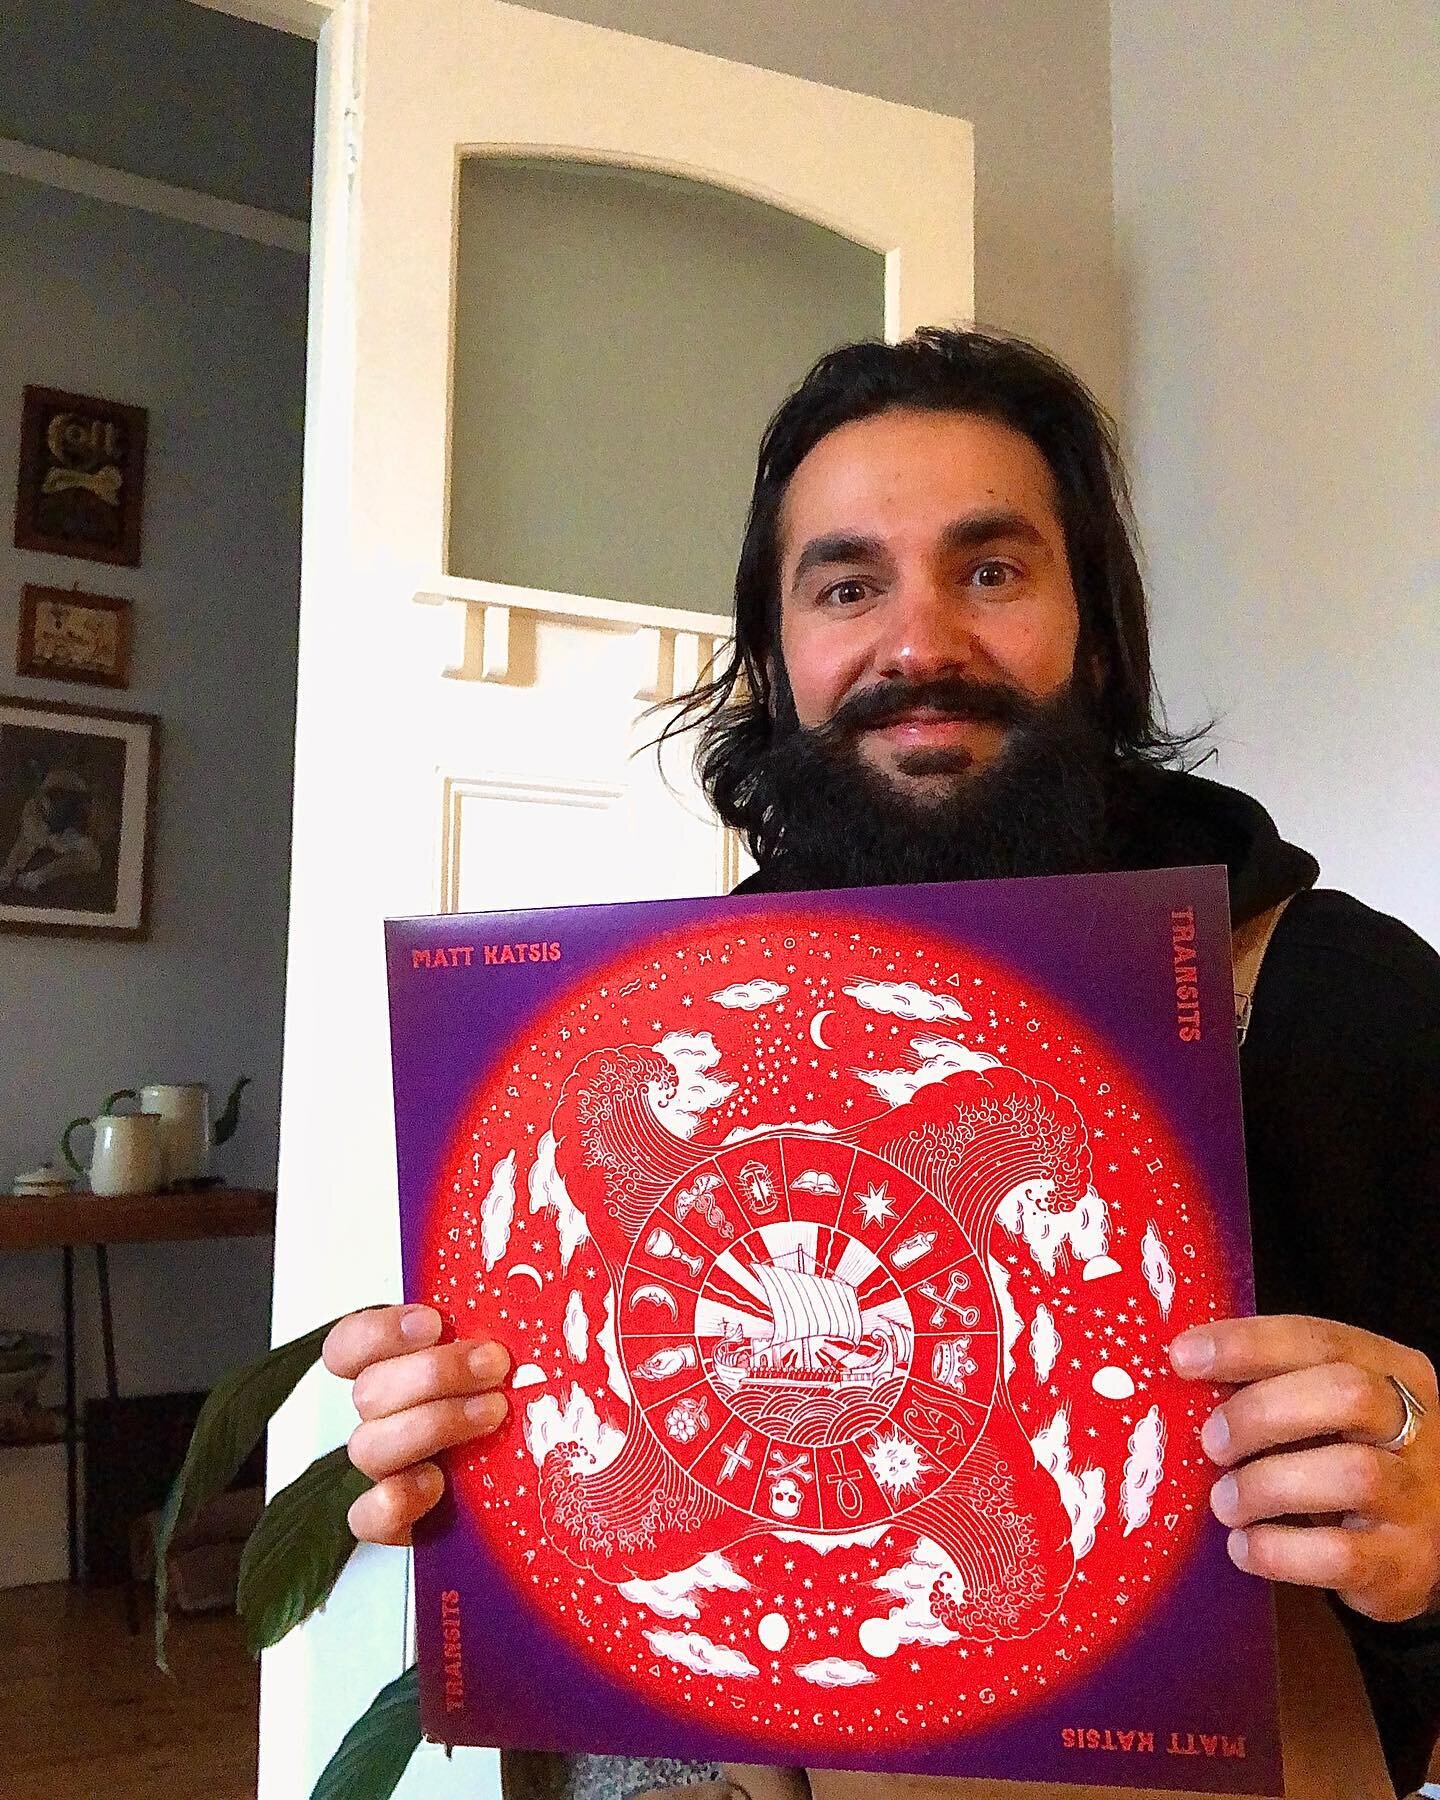 Transits Vinyl has arrived!!!⁣
Thank you to @zenithrecords @regionalartsvic @creative_vic this is a limited run and pre-orders are available right now through my website (link in bio)⁣
⁣
I&rsquo;m happy to say that 10% of vinyl sales until August 31s